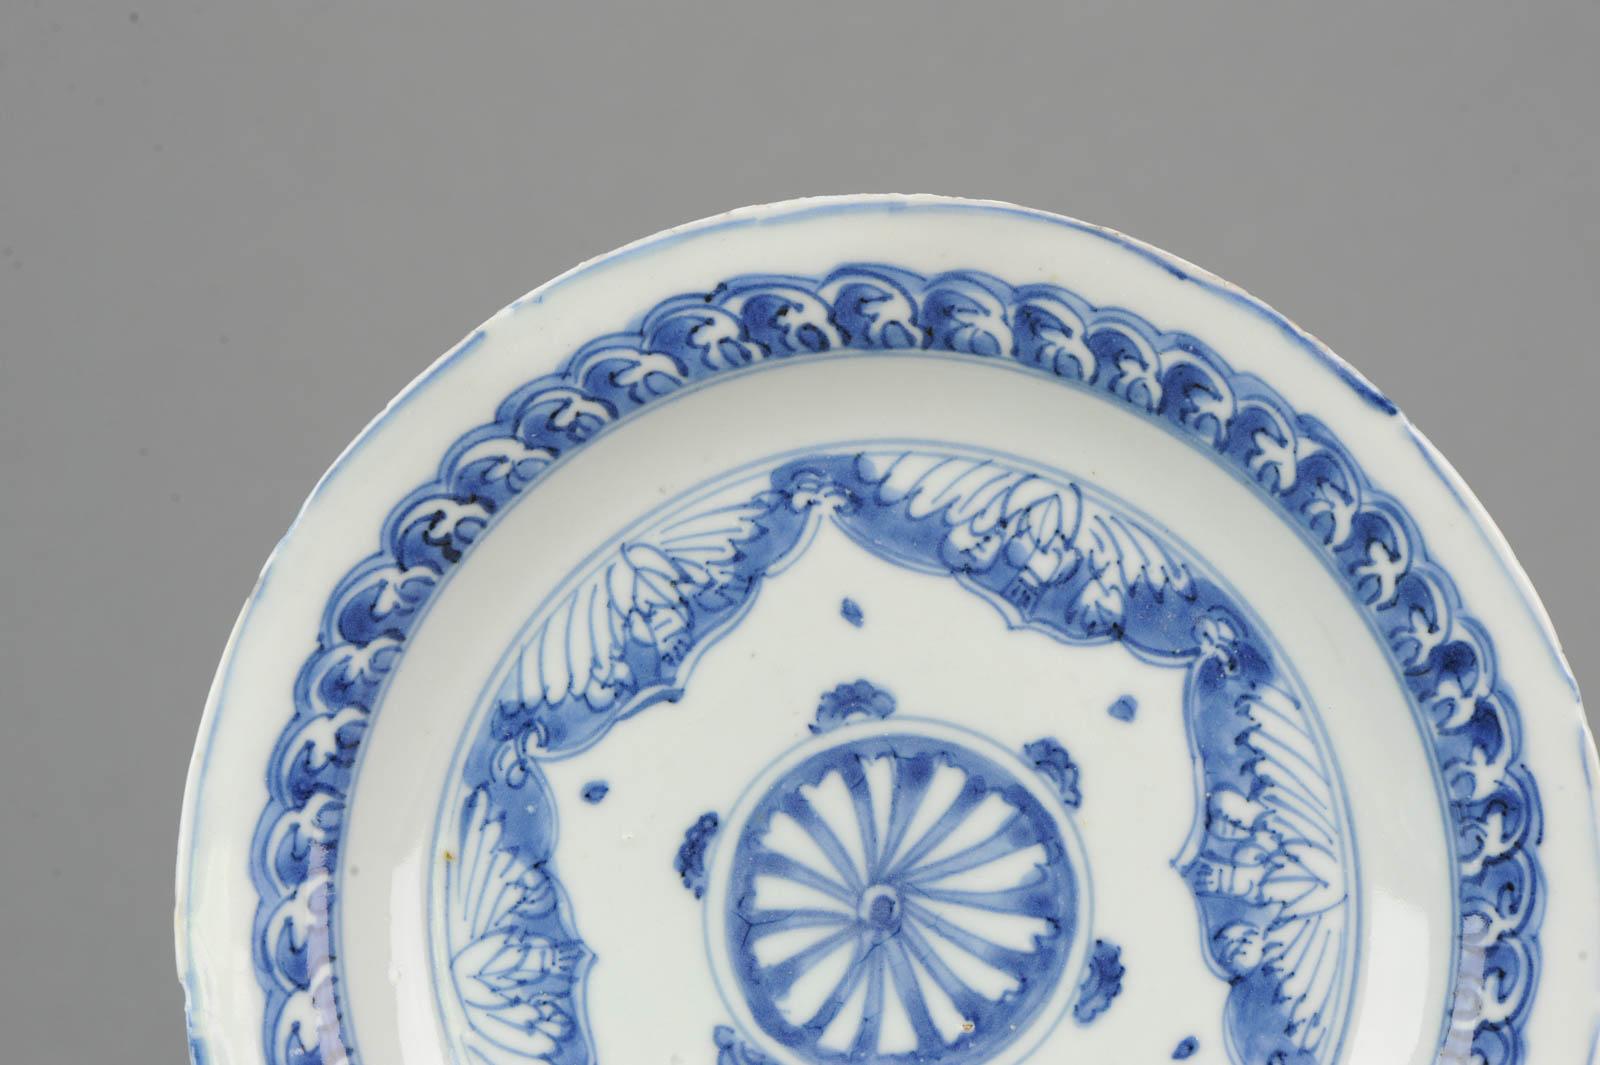 18th Century and Earlier Antique 16th Century Porcelain Ming Jiajing Wanli Transitional Buddhist Plate